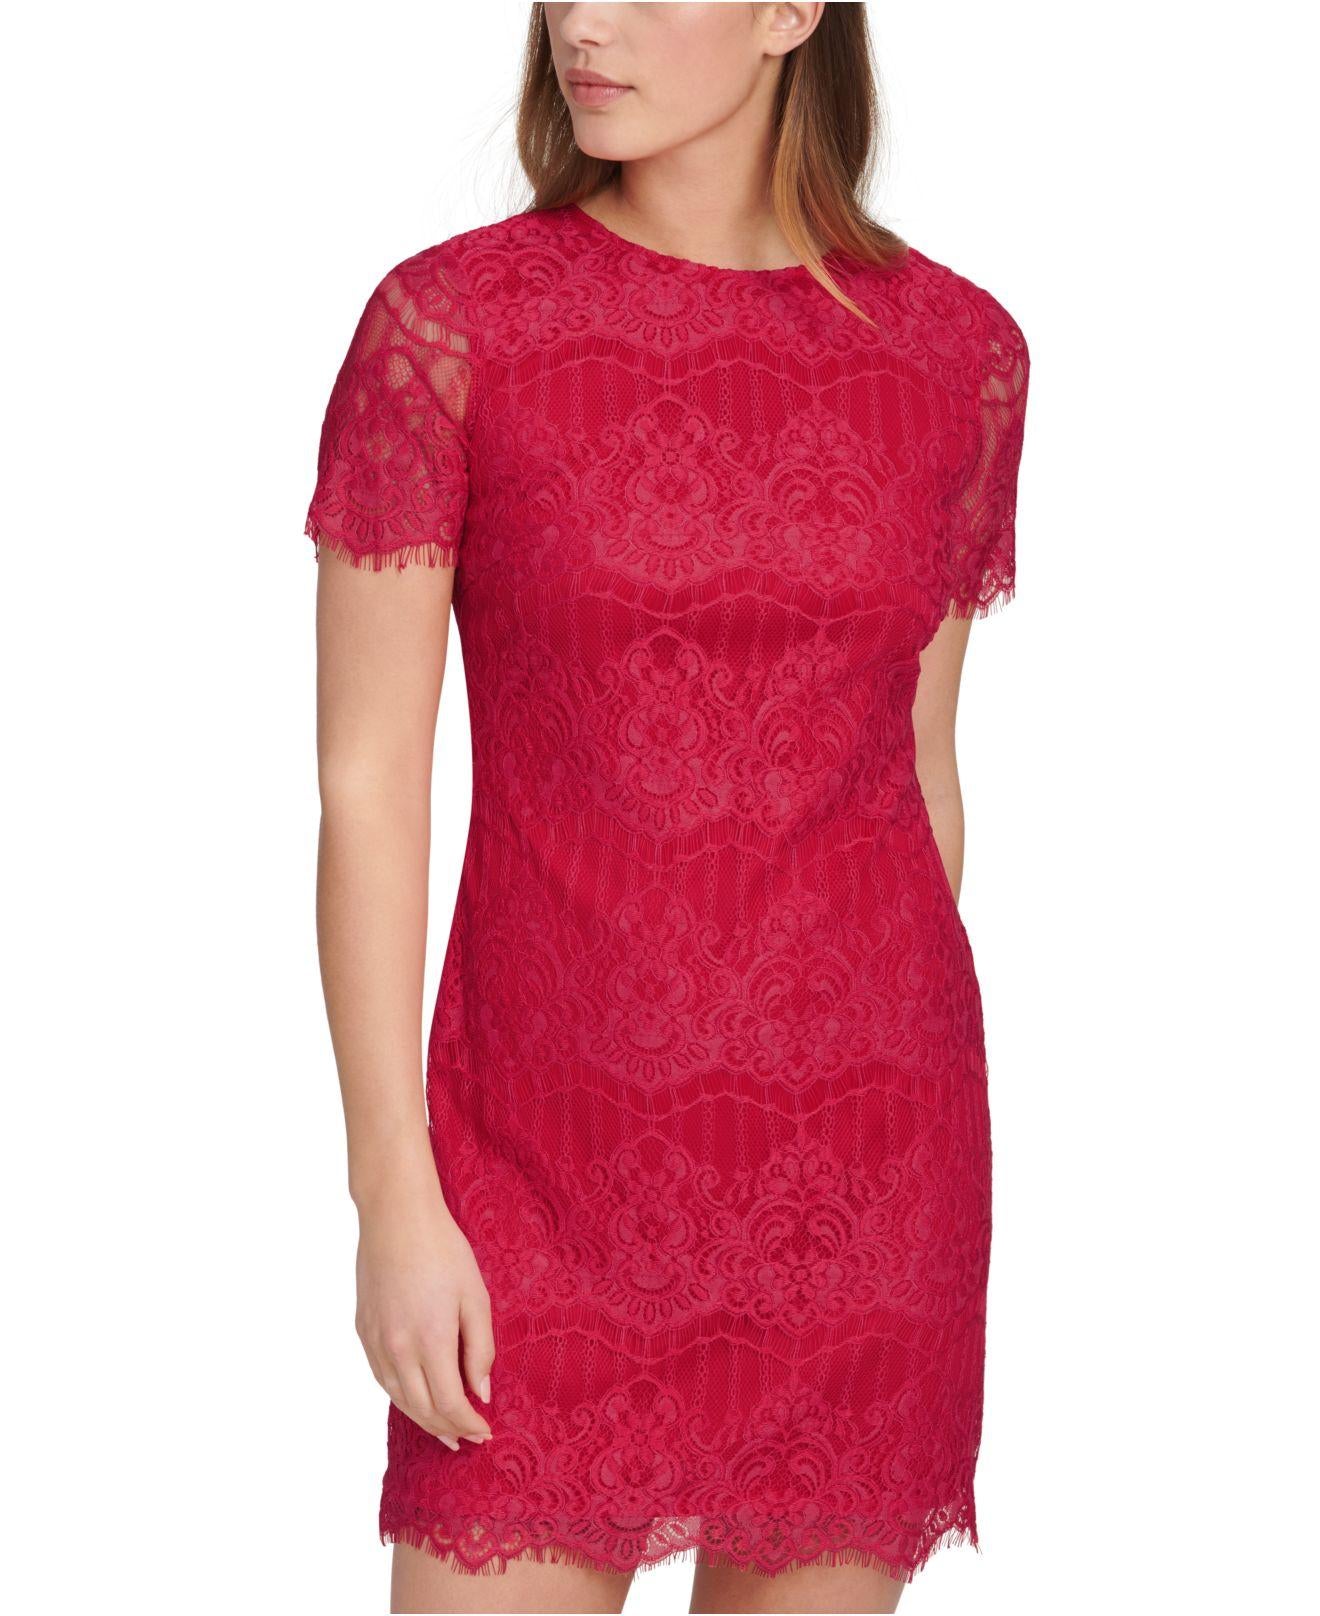 KENSIE DRESSES Womens Pink Stretch Zippered Lace Scalloped Short Sleeve Crew Neck Short Party Sheath Dress Juniors 6